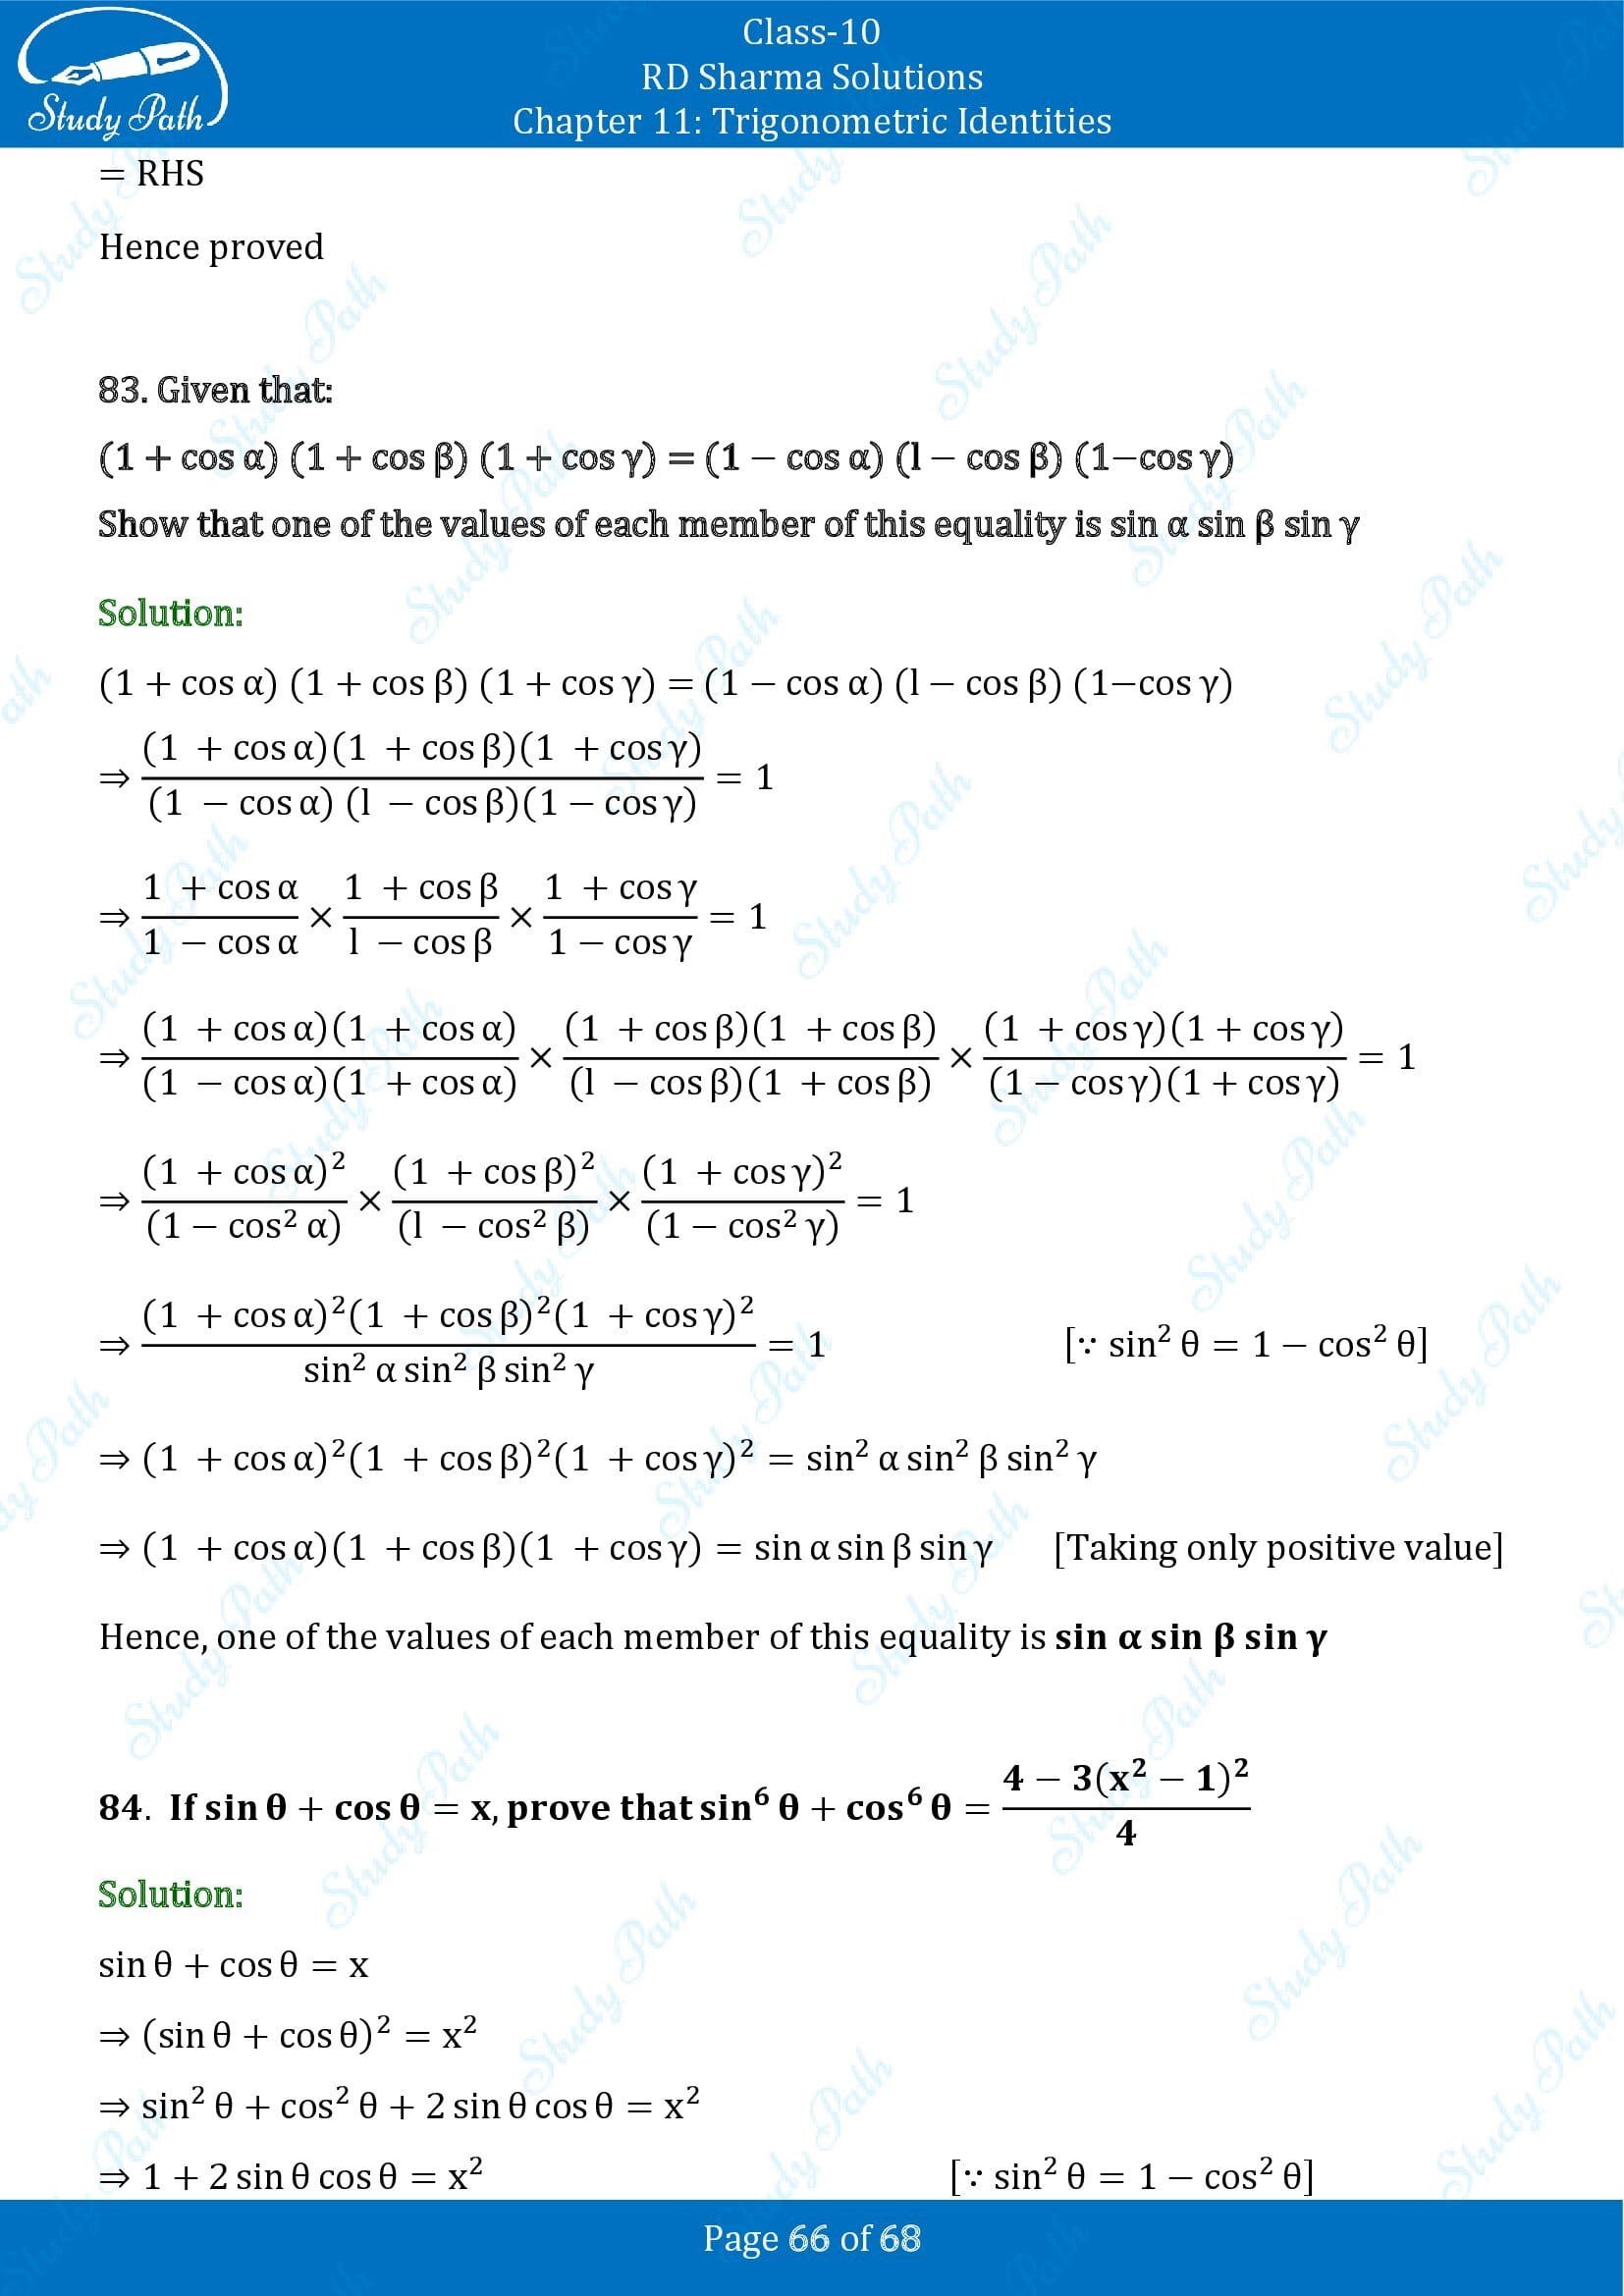 RD Sharma Solutions Class 10 Chapter 11 Trigonometric Identities Exercise 11.1 00066